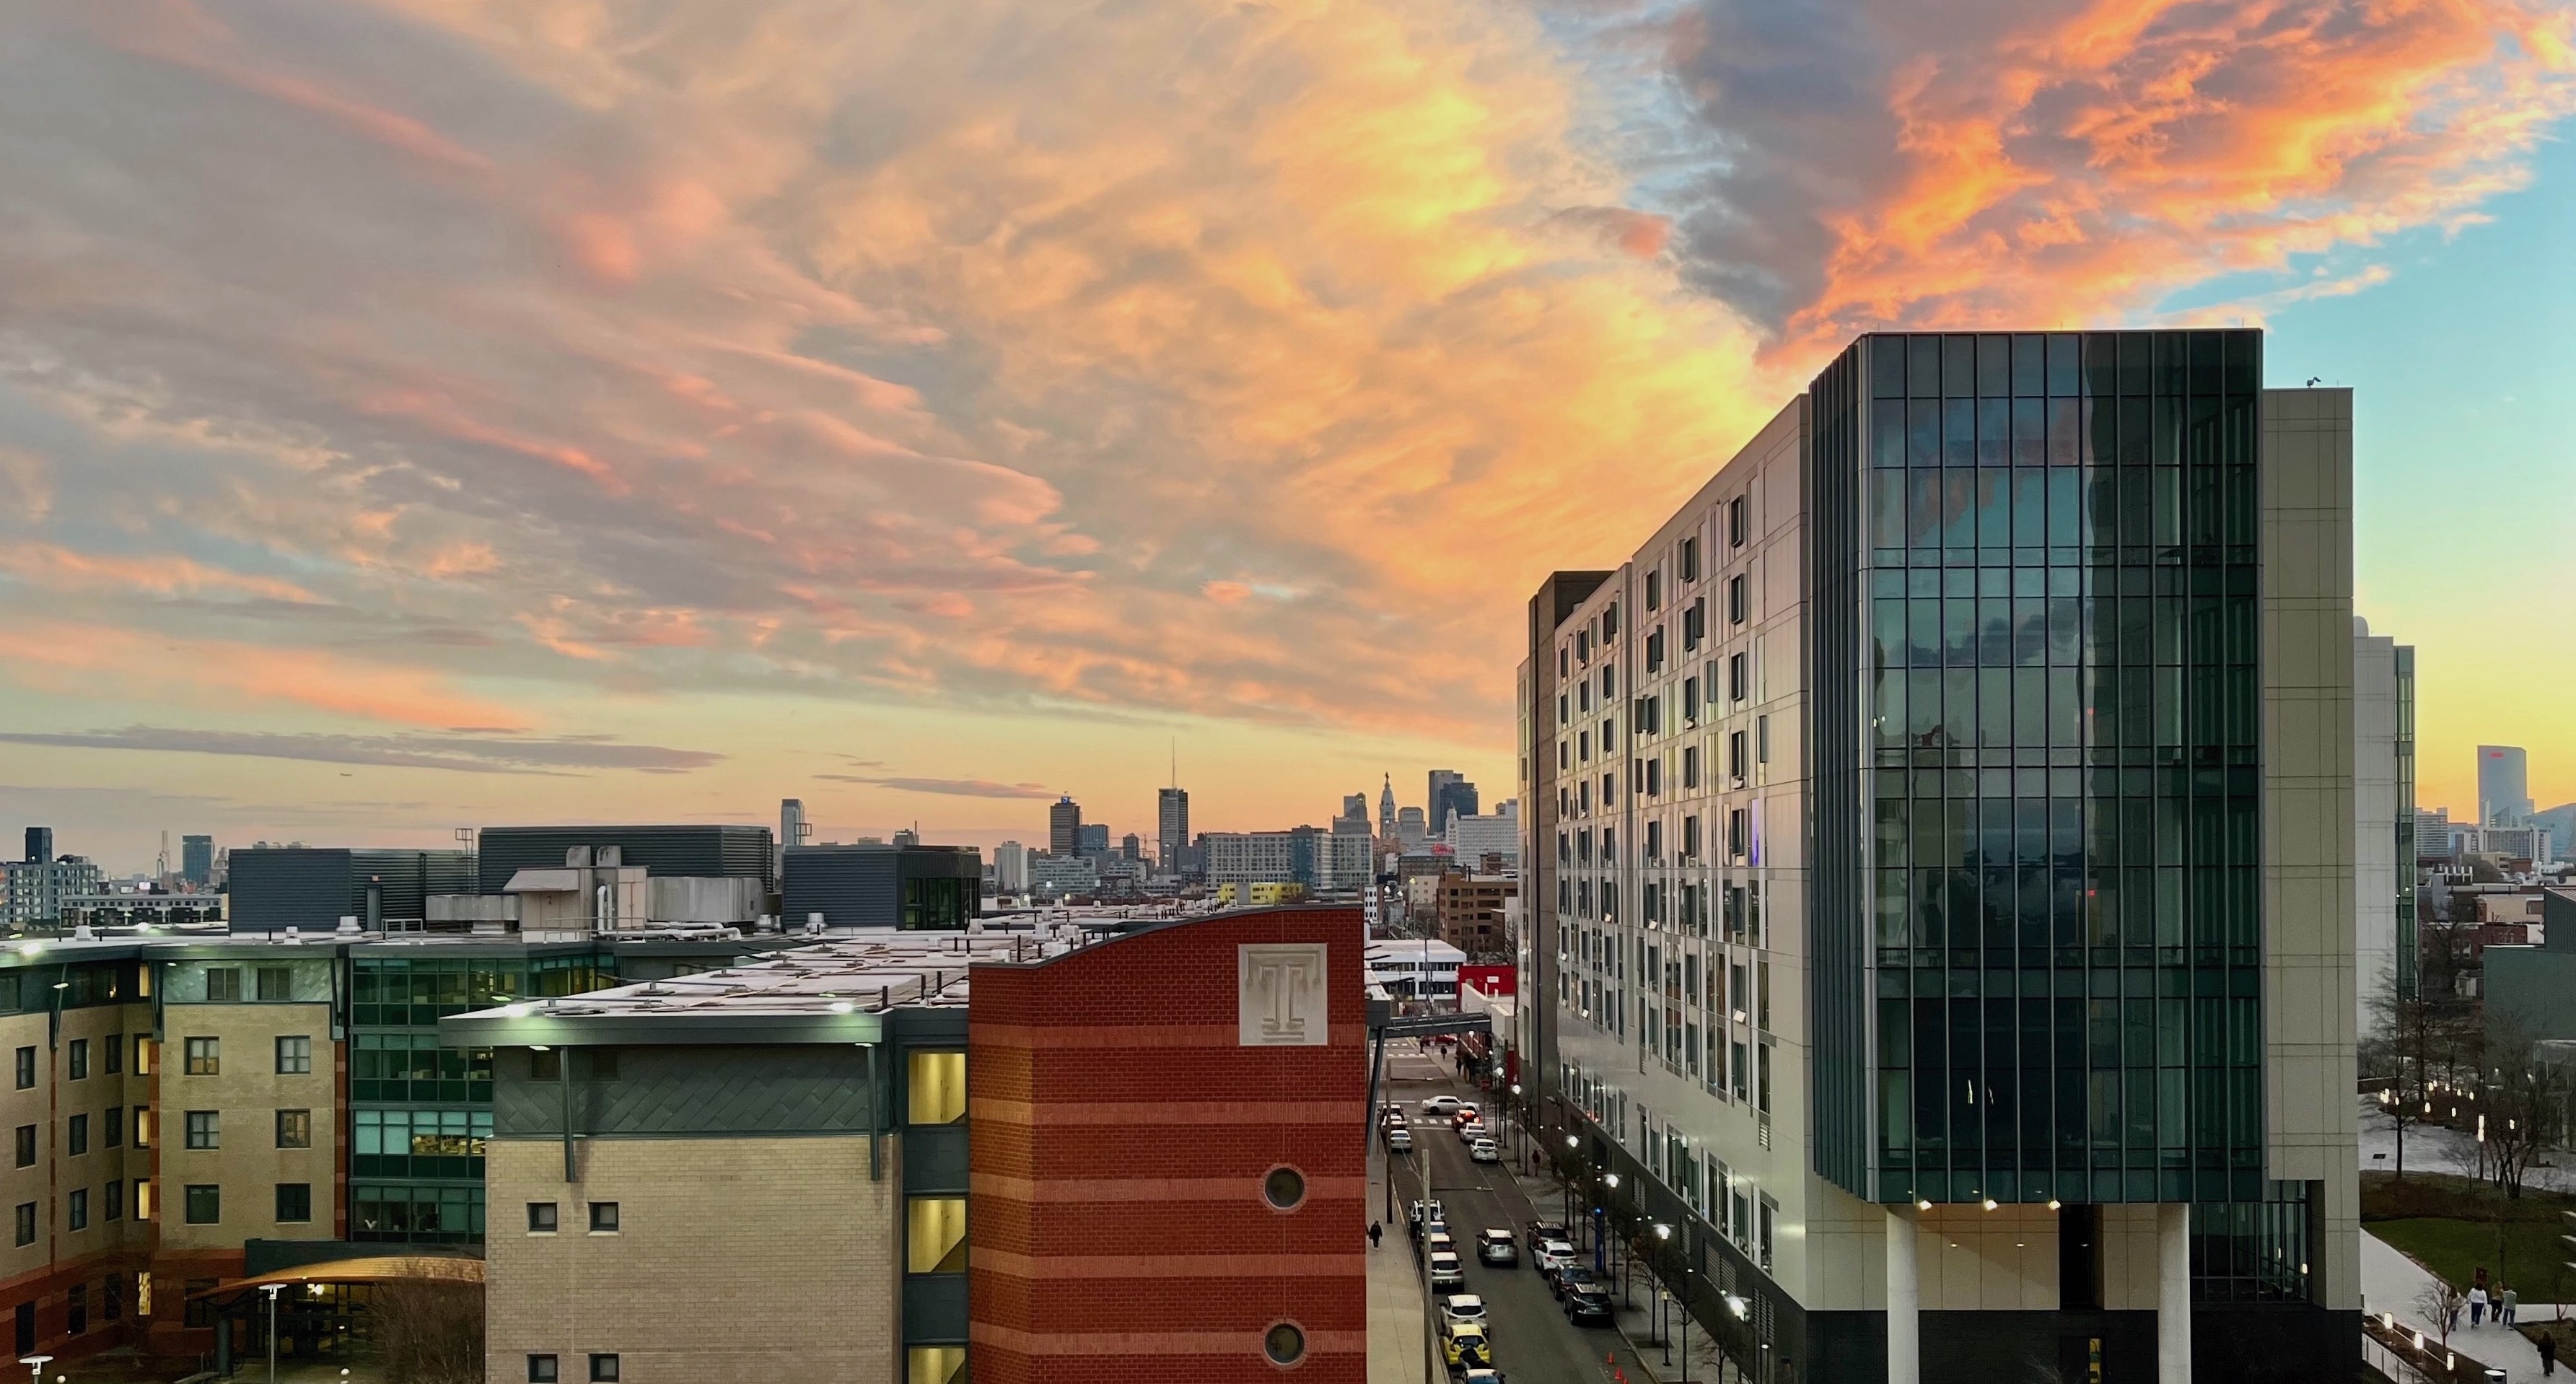 Photo of the view looking towards downtown Philadelphia at sunset from the Department of Epidemiology and Biostatistics, Temple University